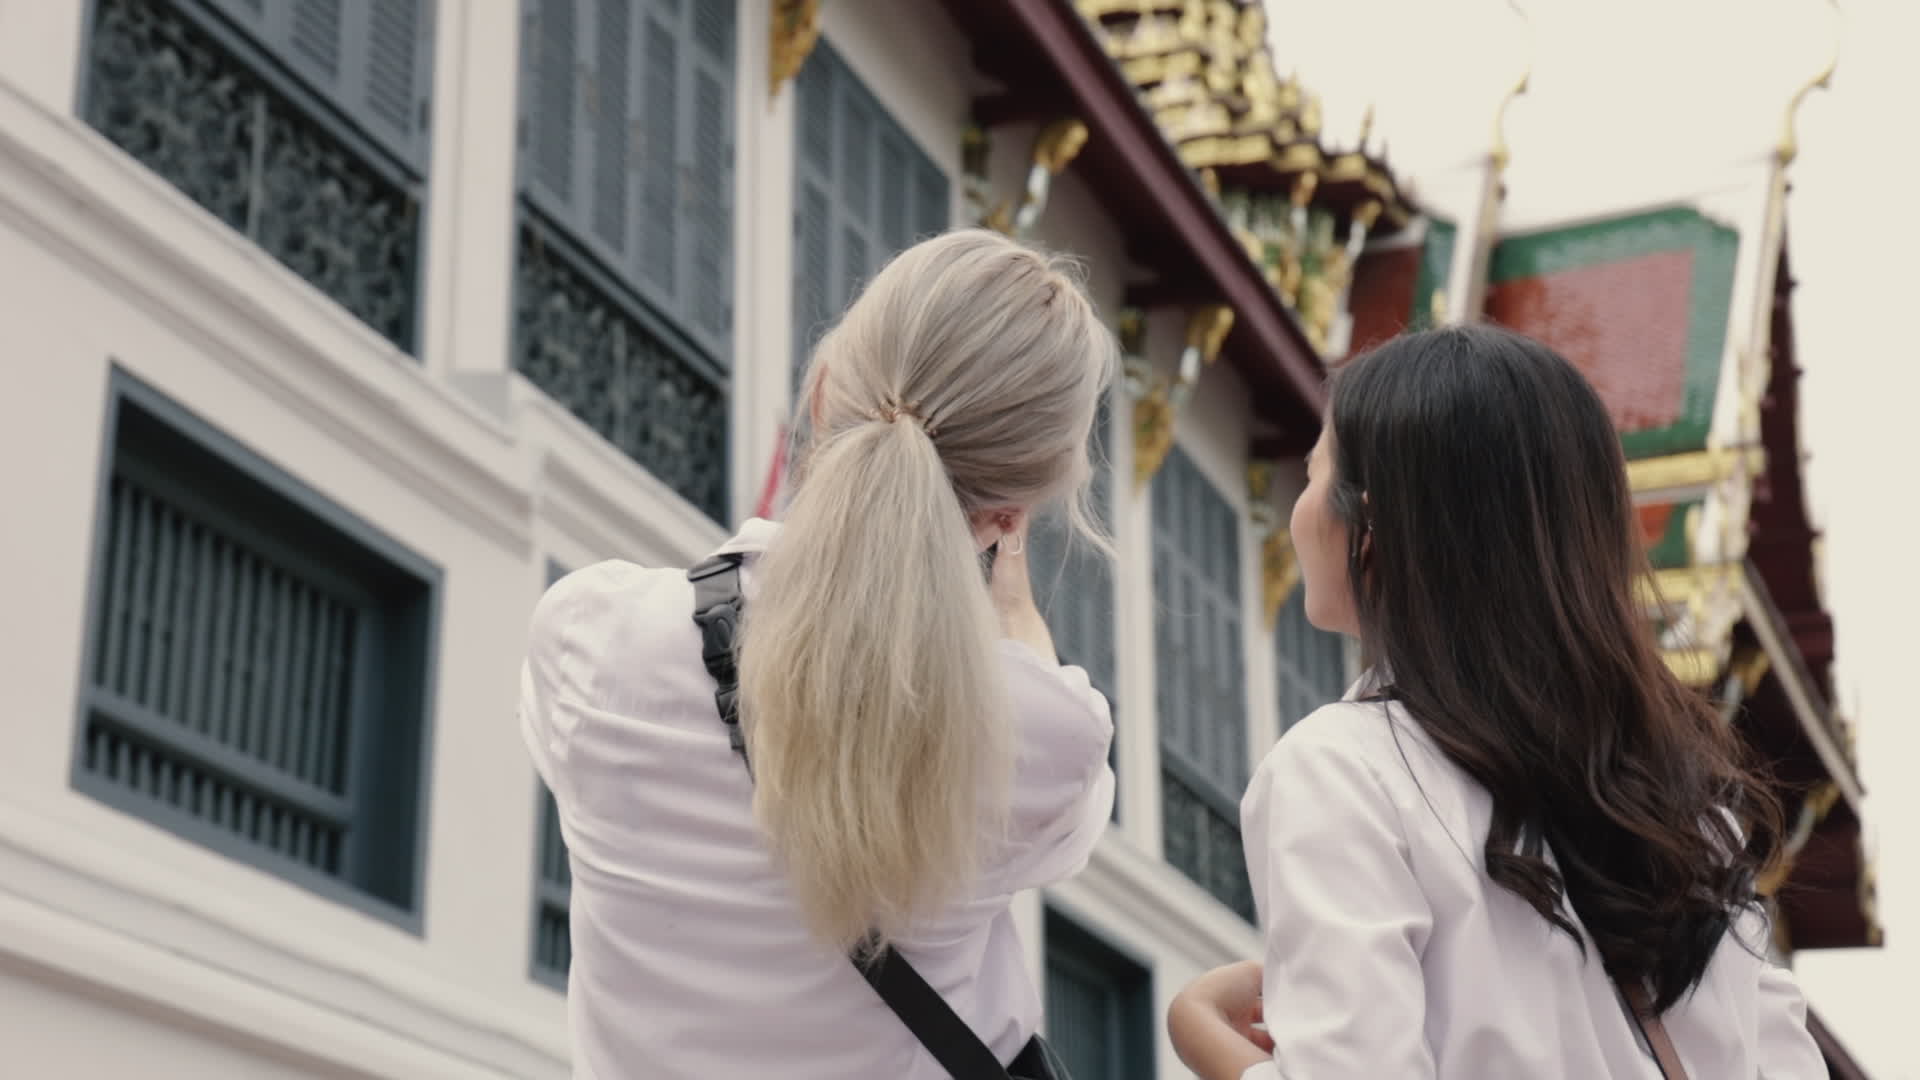 Asian Lesbian Couples Enjoy Traveling In Thailand And Using A Smartphone Taking A Selfie